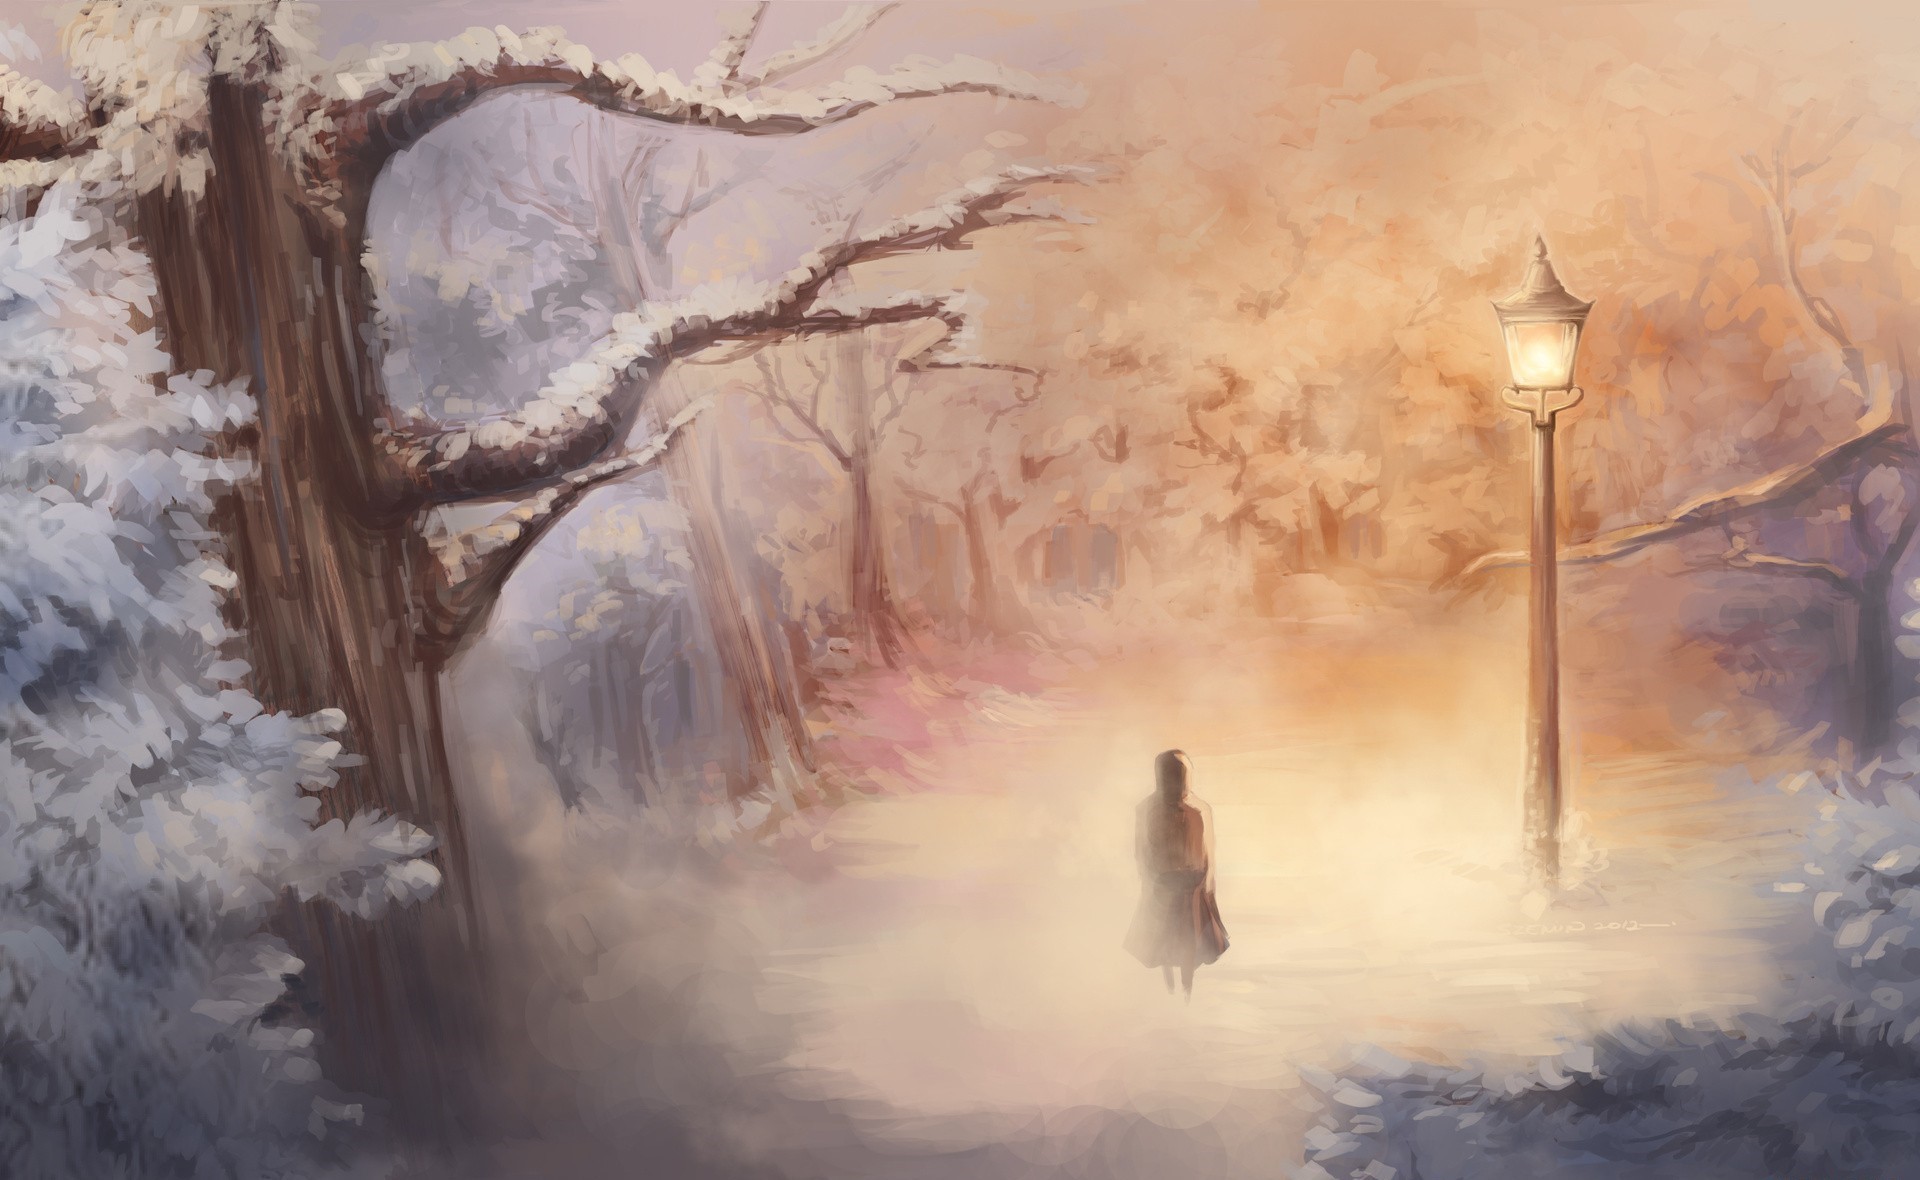 Narnia Wallpaper The Best Image In